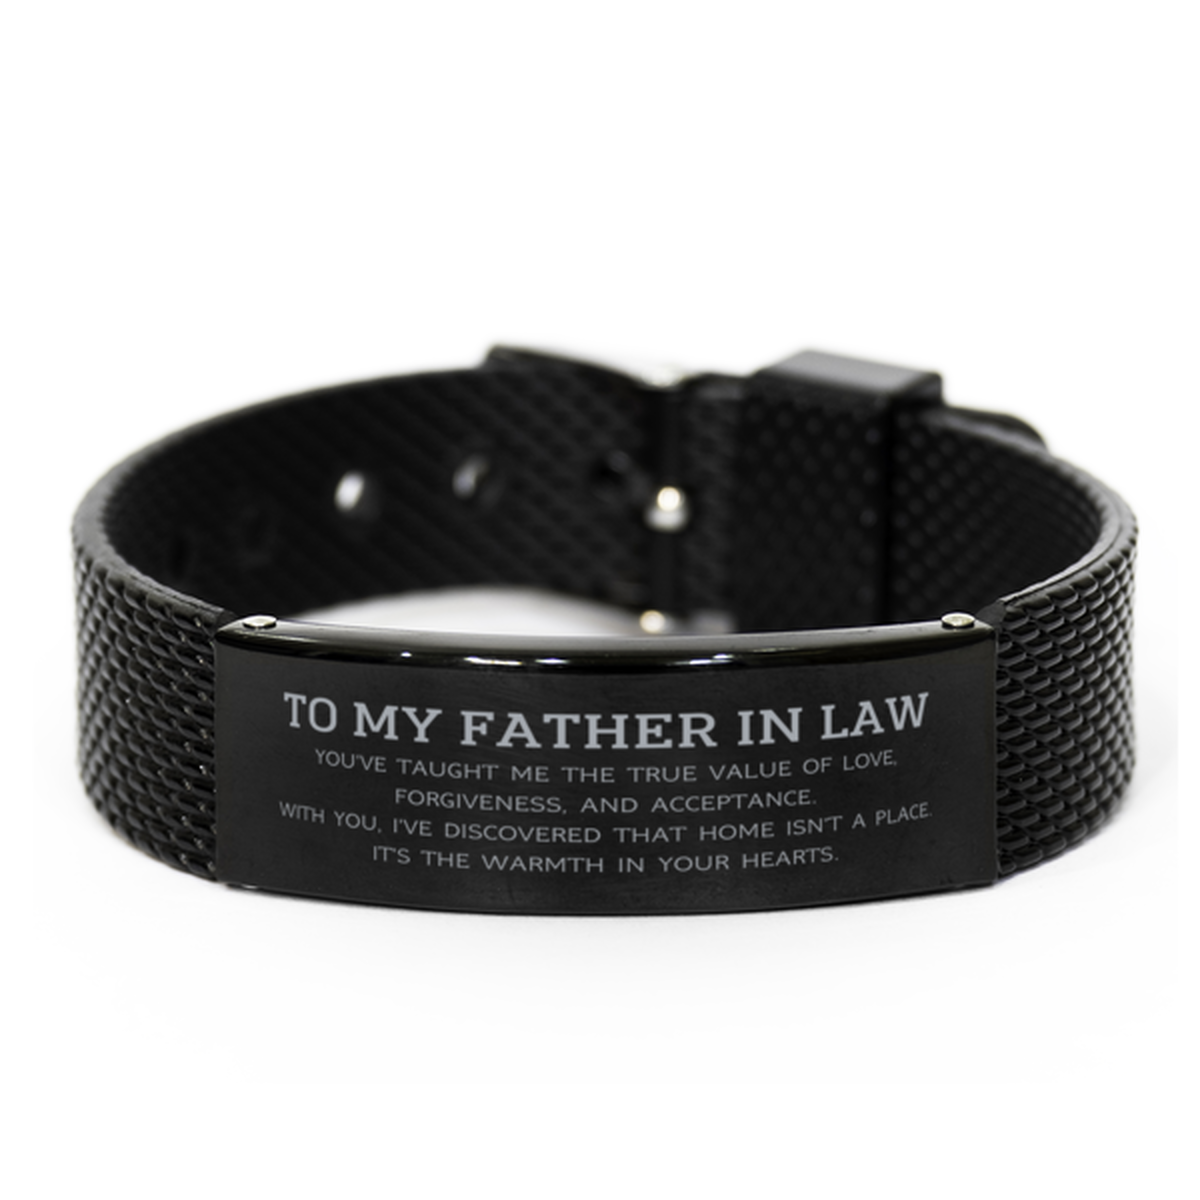 To My Father In Law Gifts, You've taught me the true value of love, Thank You Gifts For Father In Law, Birthday Black Shark Mesh Bracelet For Father In Law